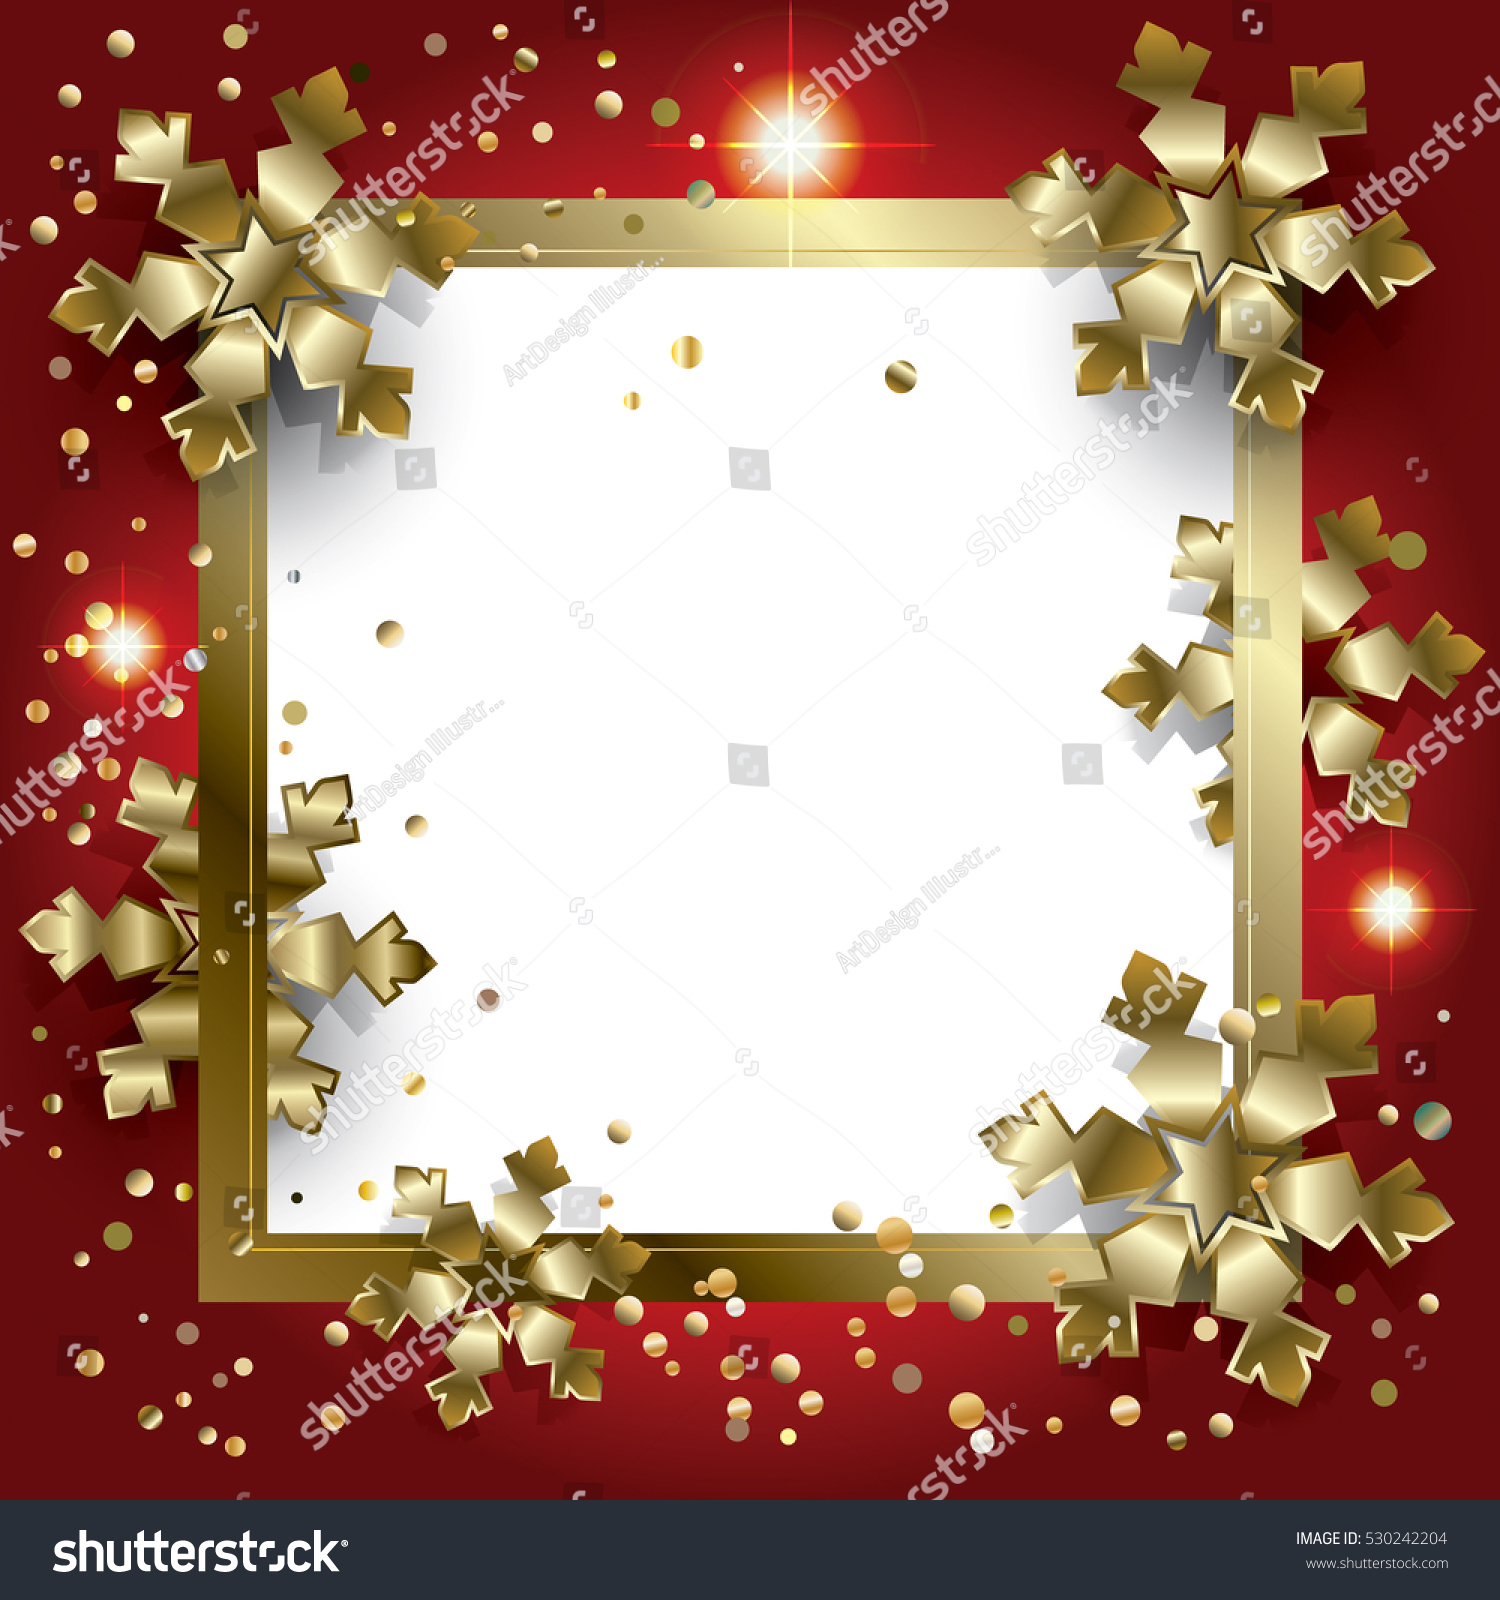 Download Merry Christmas Happy New Year Frame Stock Illustration ...